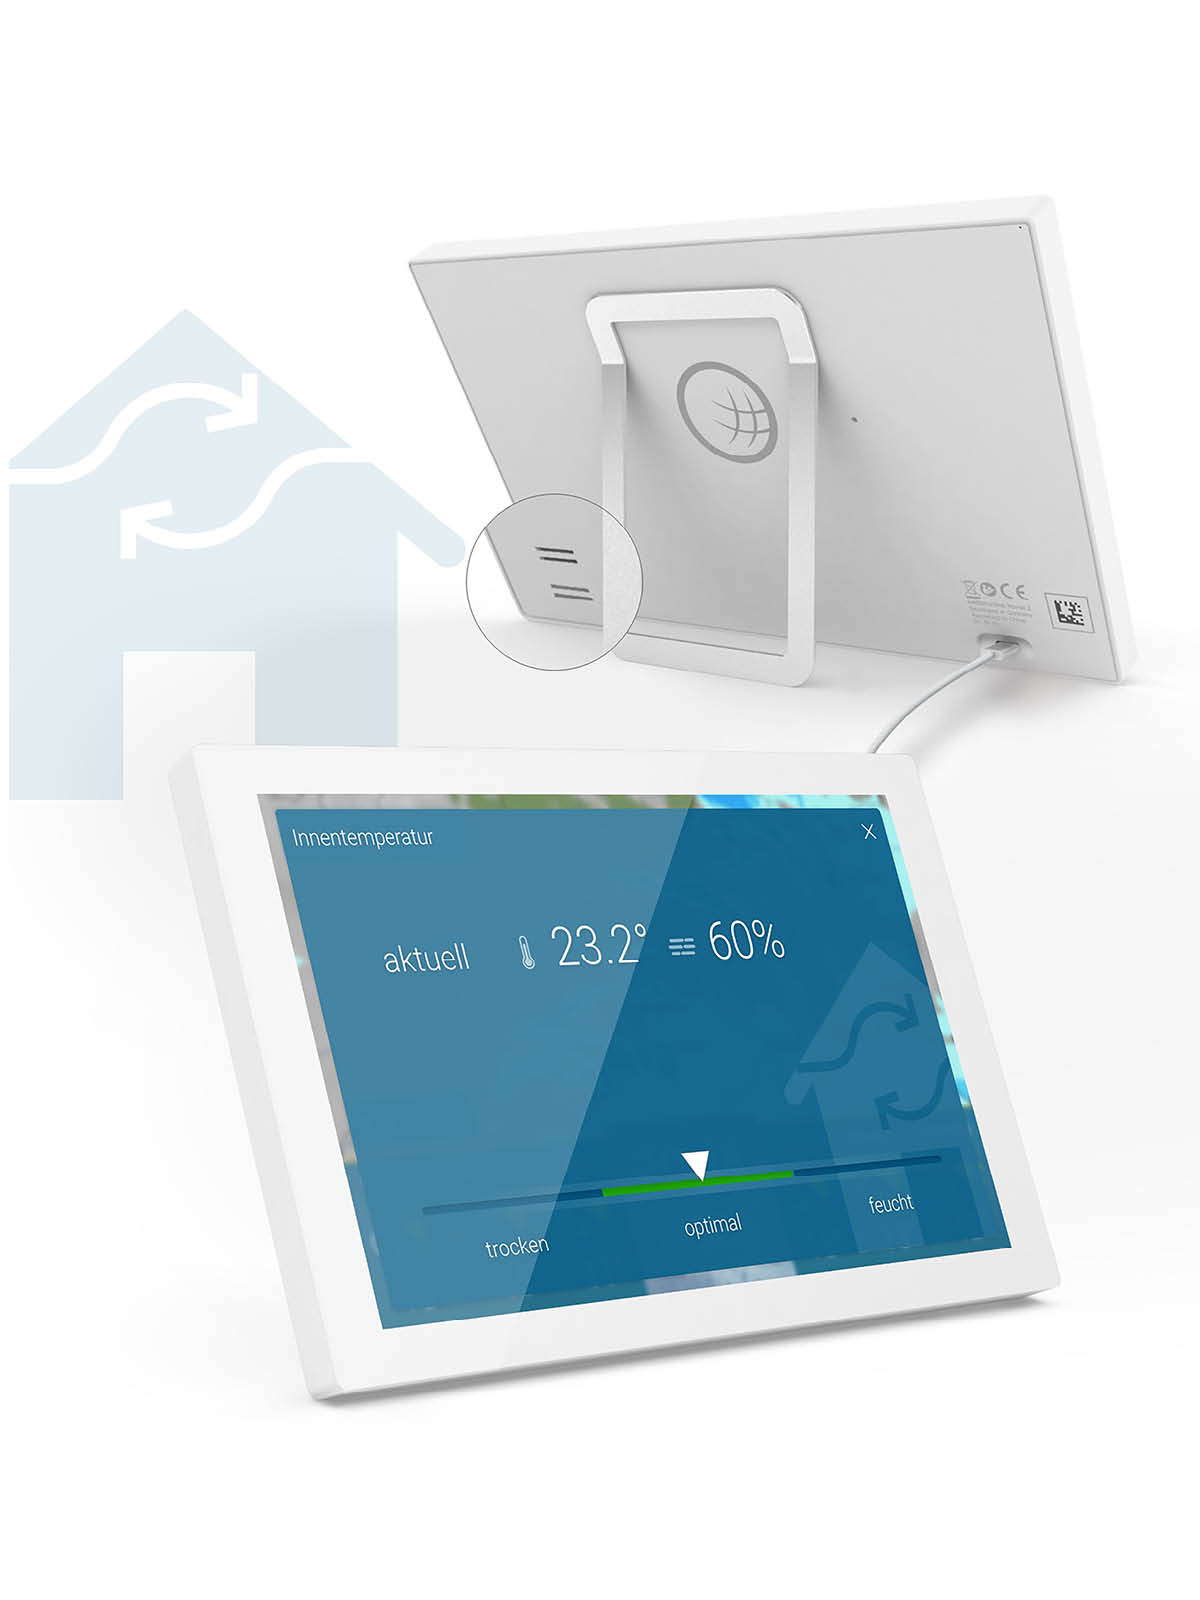 Wetteronline Home 3 - Weather Display with integrated Indoor Climate Sensor